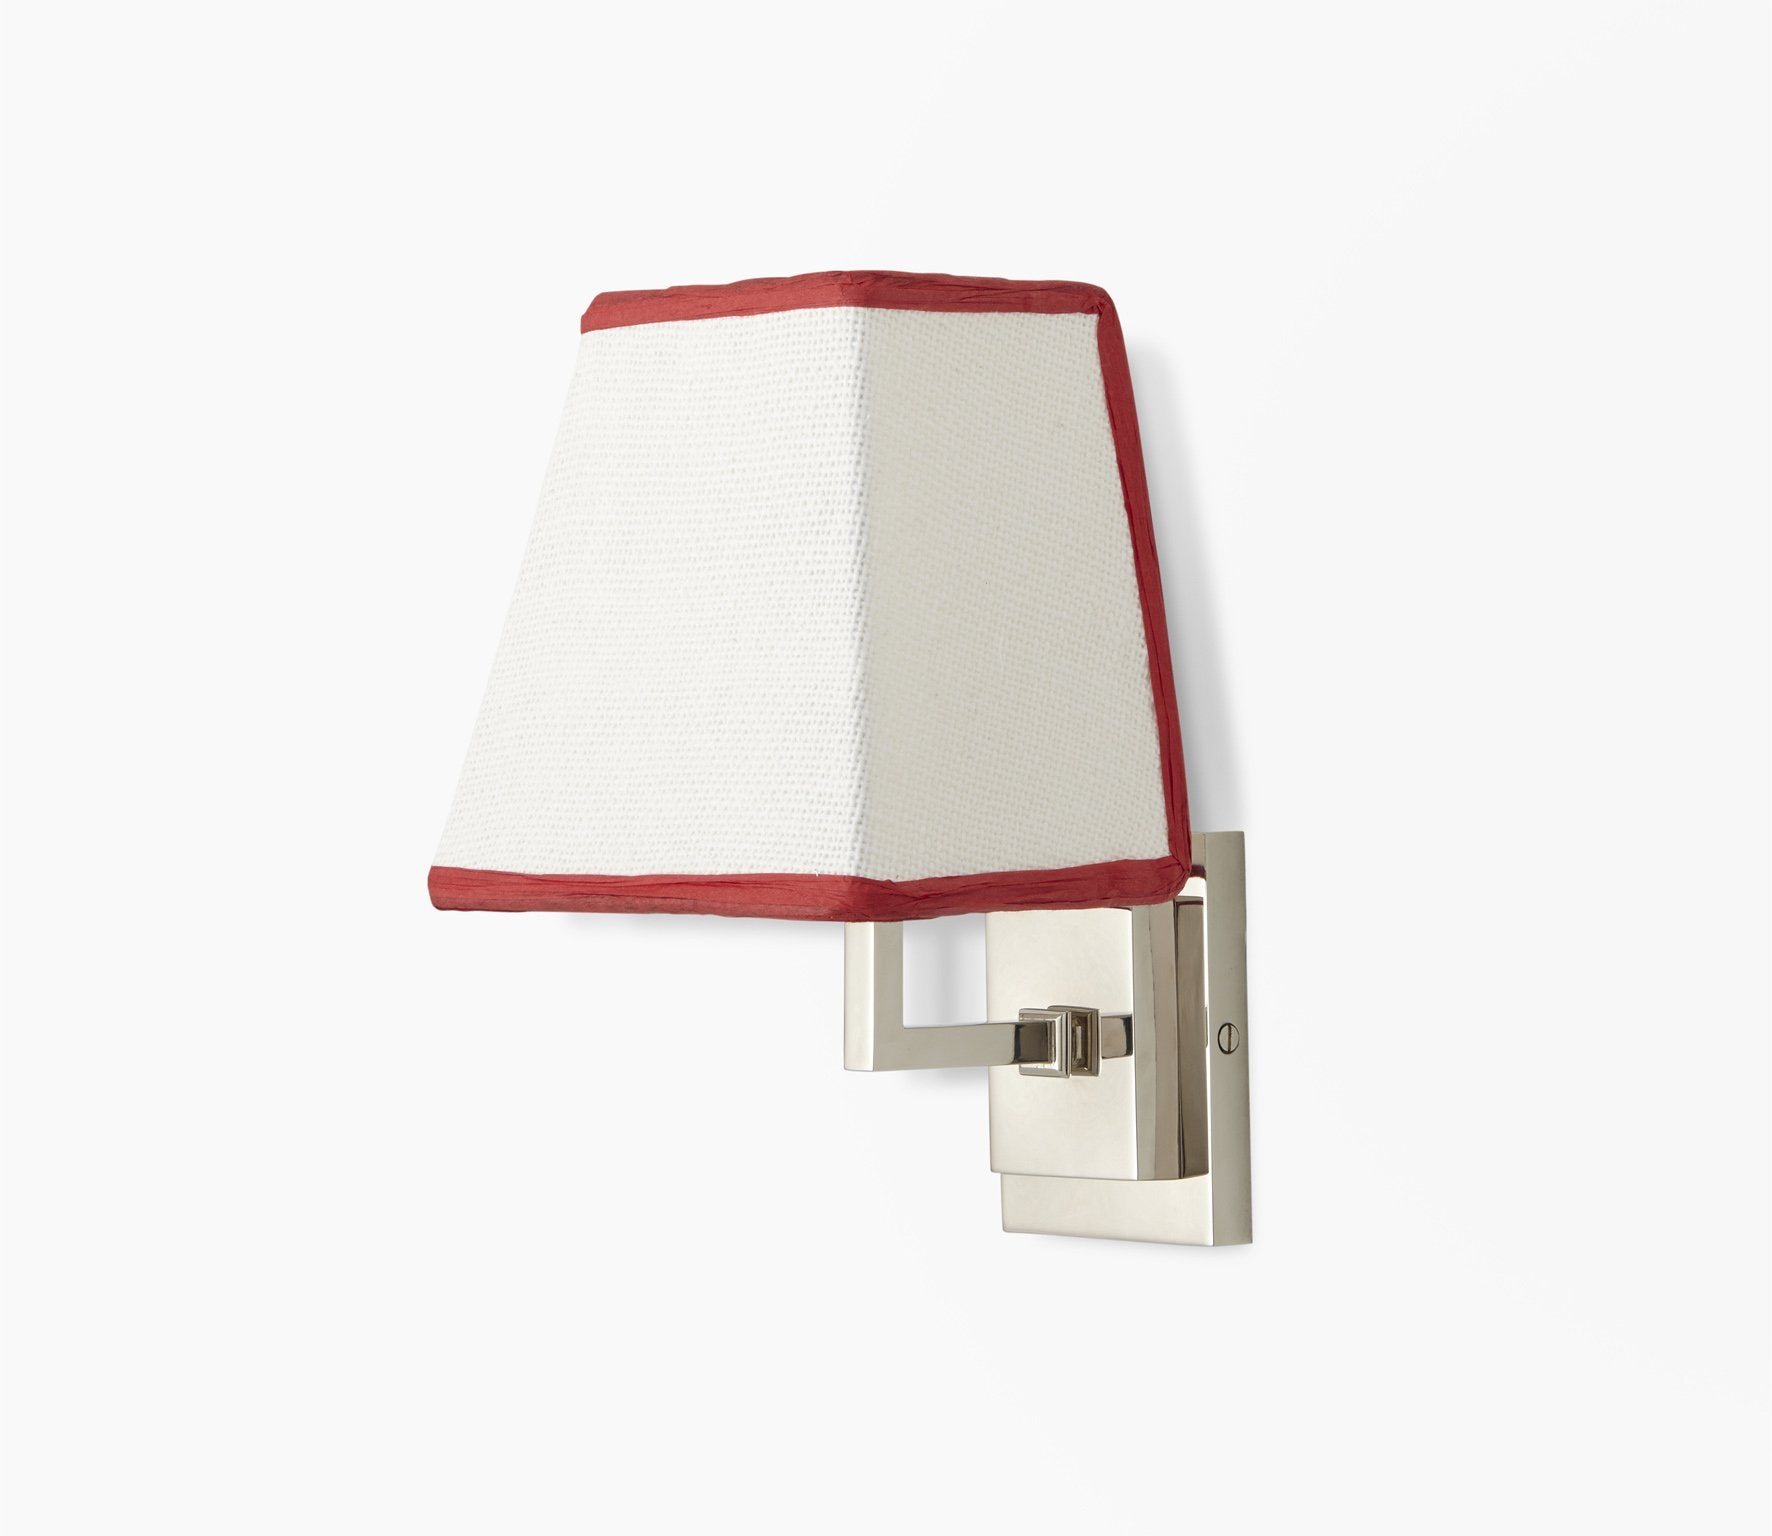 Parker Wall Light with Trapezoid Shade Product Image 1